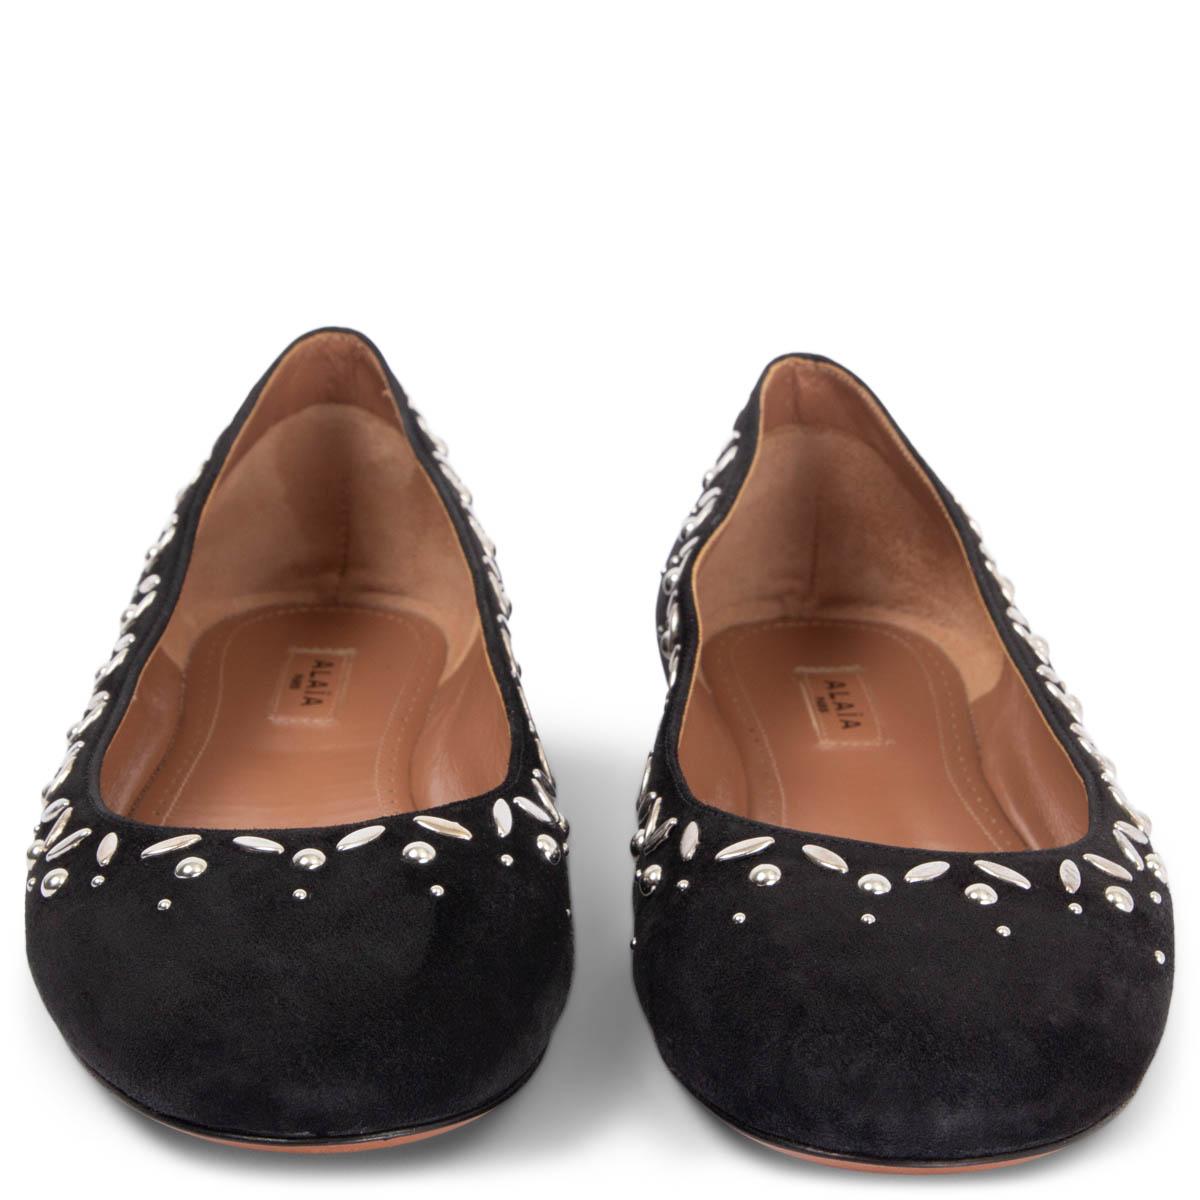 100% authentic Alaïa ballet flats in black suede embellished with silver-tone studs. Have been worn once inside and are in virtually new condition. 

Measurements
Imprinted Size	38
Shoe Size	38
Inside Sole	25cm (9.8in)
Width	7.5cm